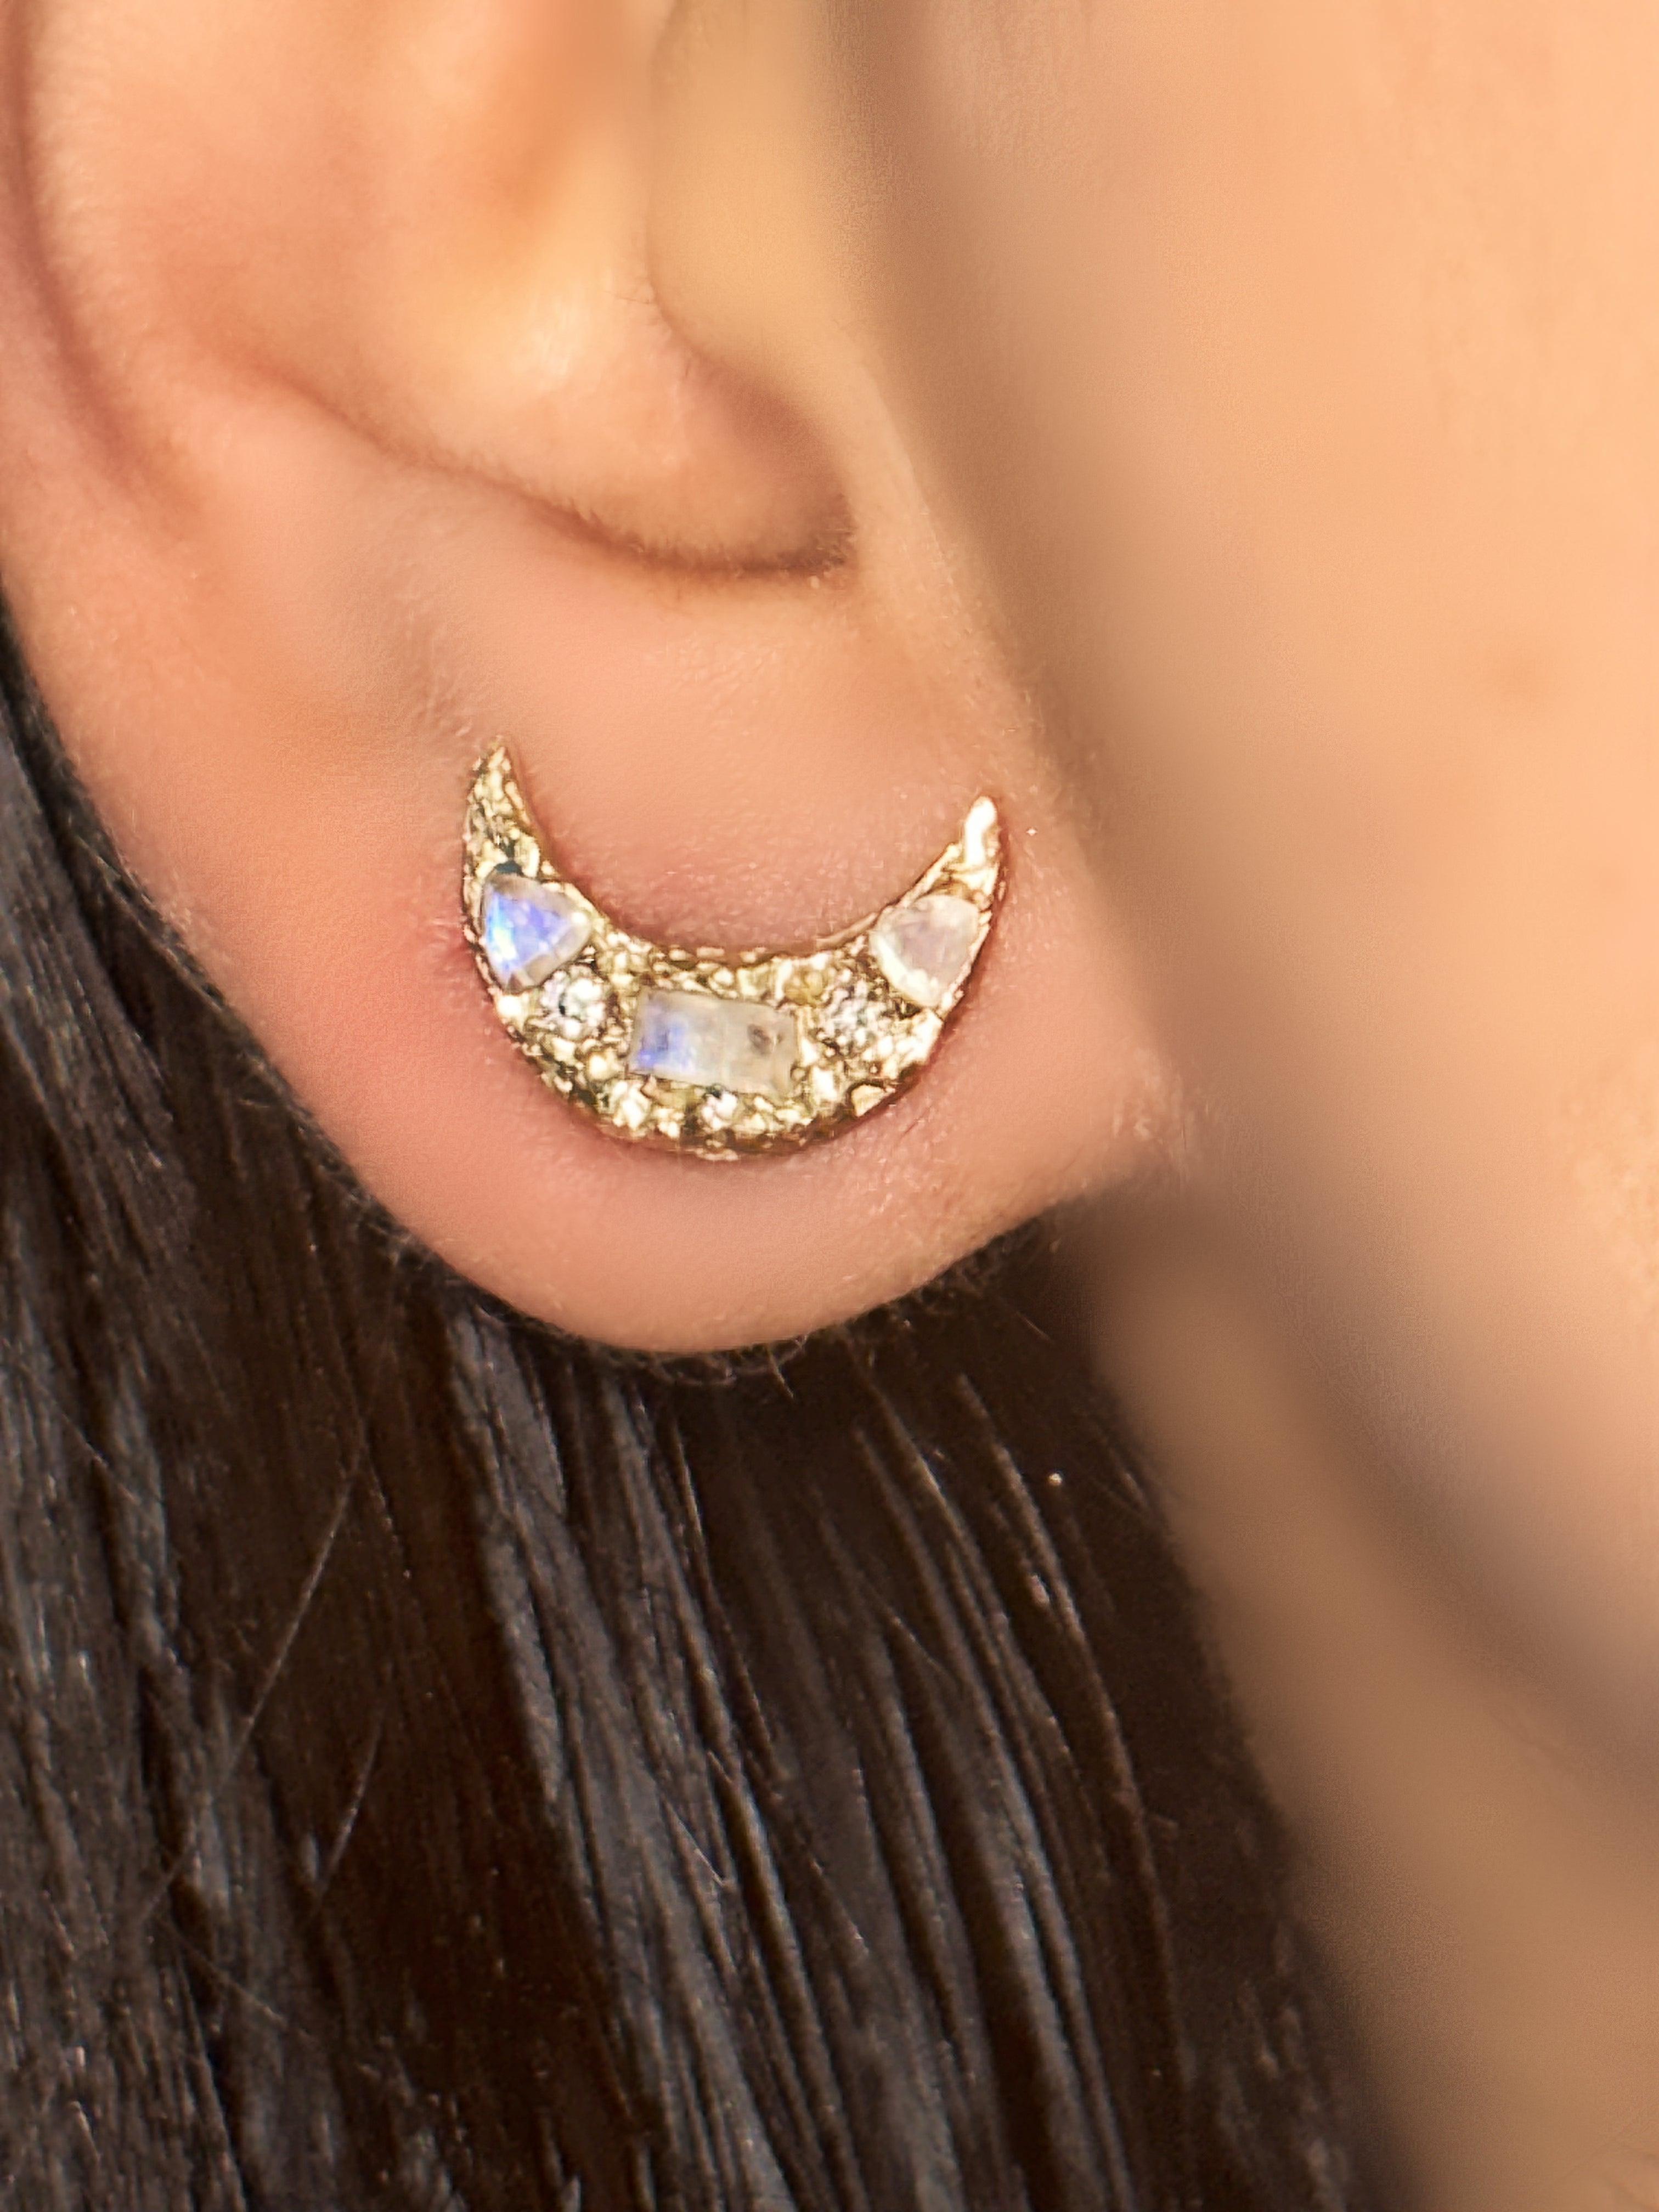 Introducing our exquisite Celini one-of-a-kind large moon stud earrings, meticulously crafted to captivate the hearts of moon enthusiasts and jewelry connoisseurs alike.

Handcrafted, these celestial-inspired earrings are adorned with diamonds and